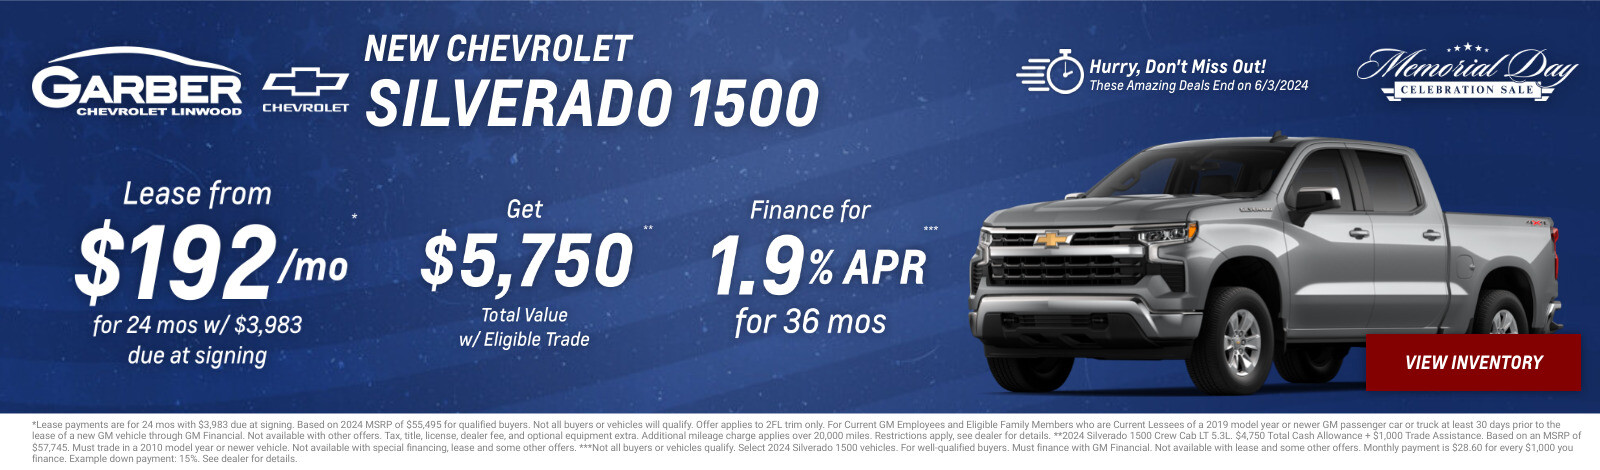 New Chevrolet Silverado Current Deals and Offers in Bay City, MI